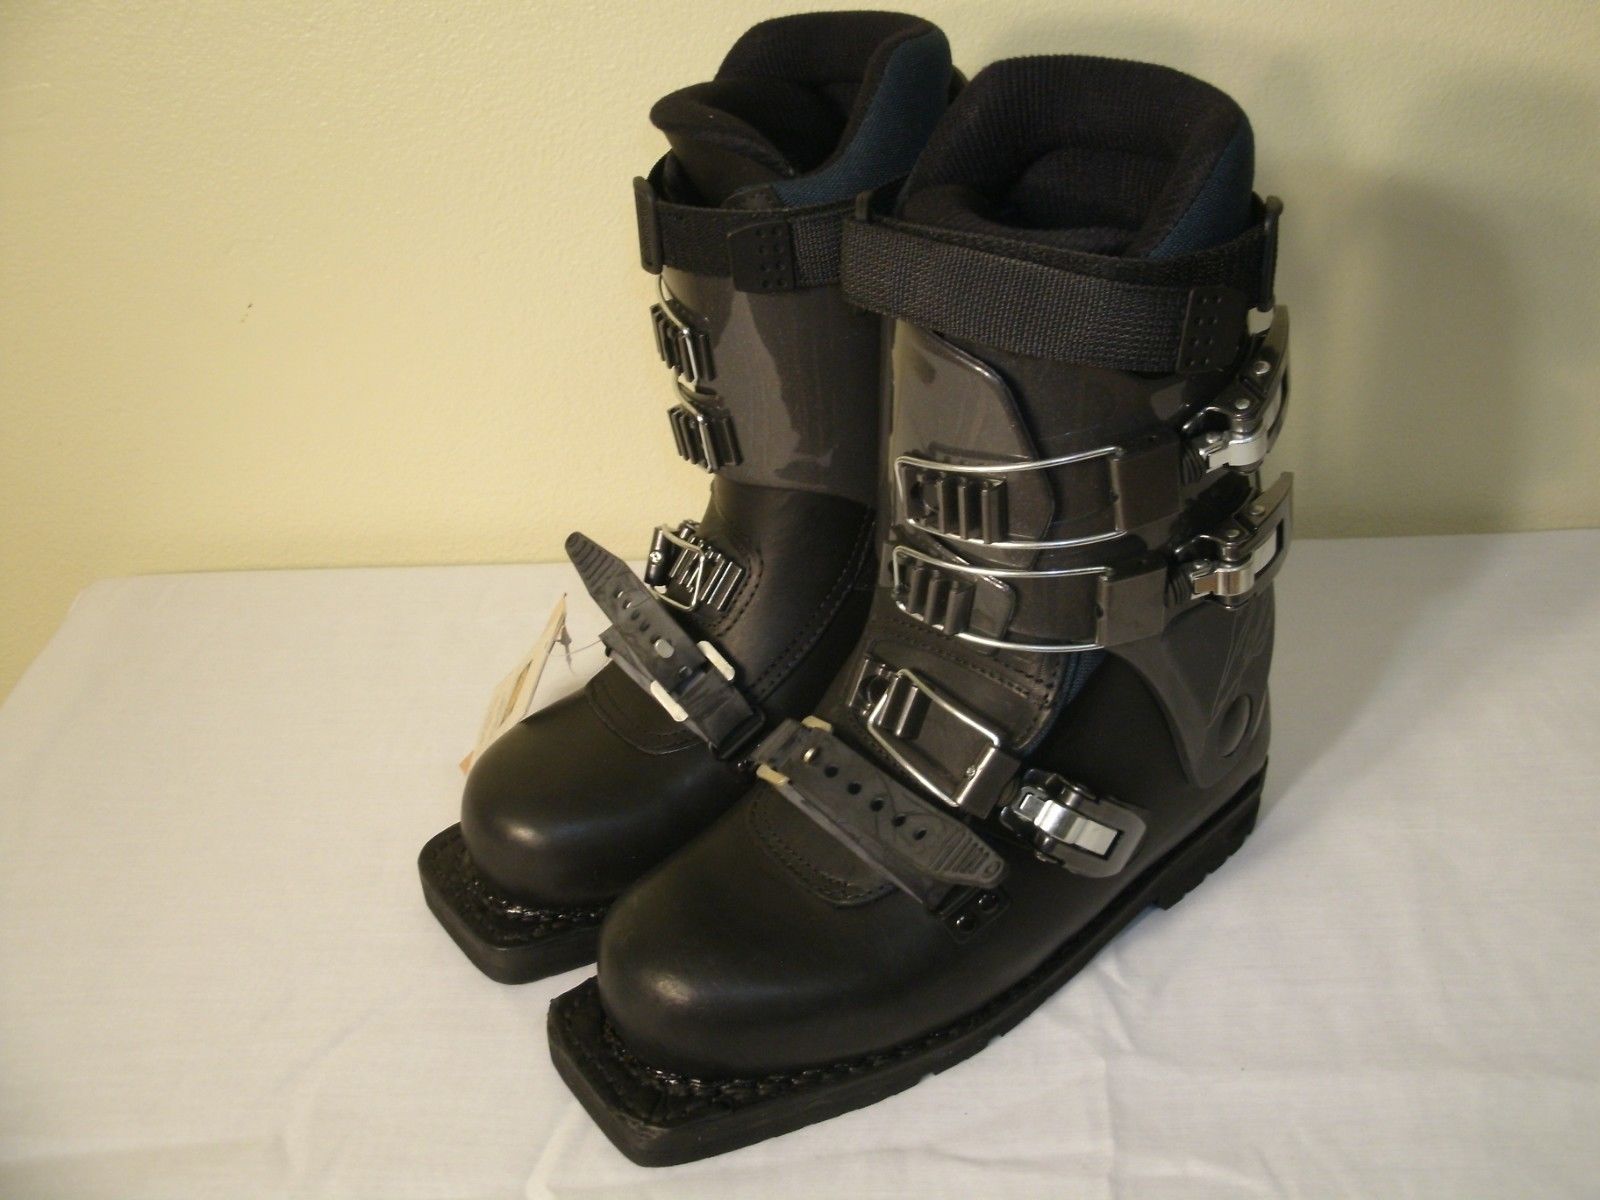 ALICO  Nordic Leather March Ski Boot  Telemark 75mm Double Expedition  size 12 W 